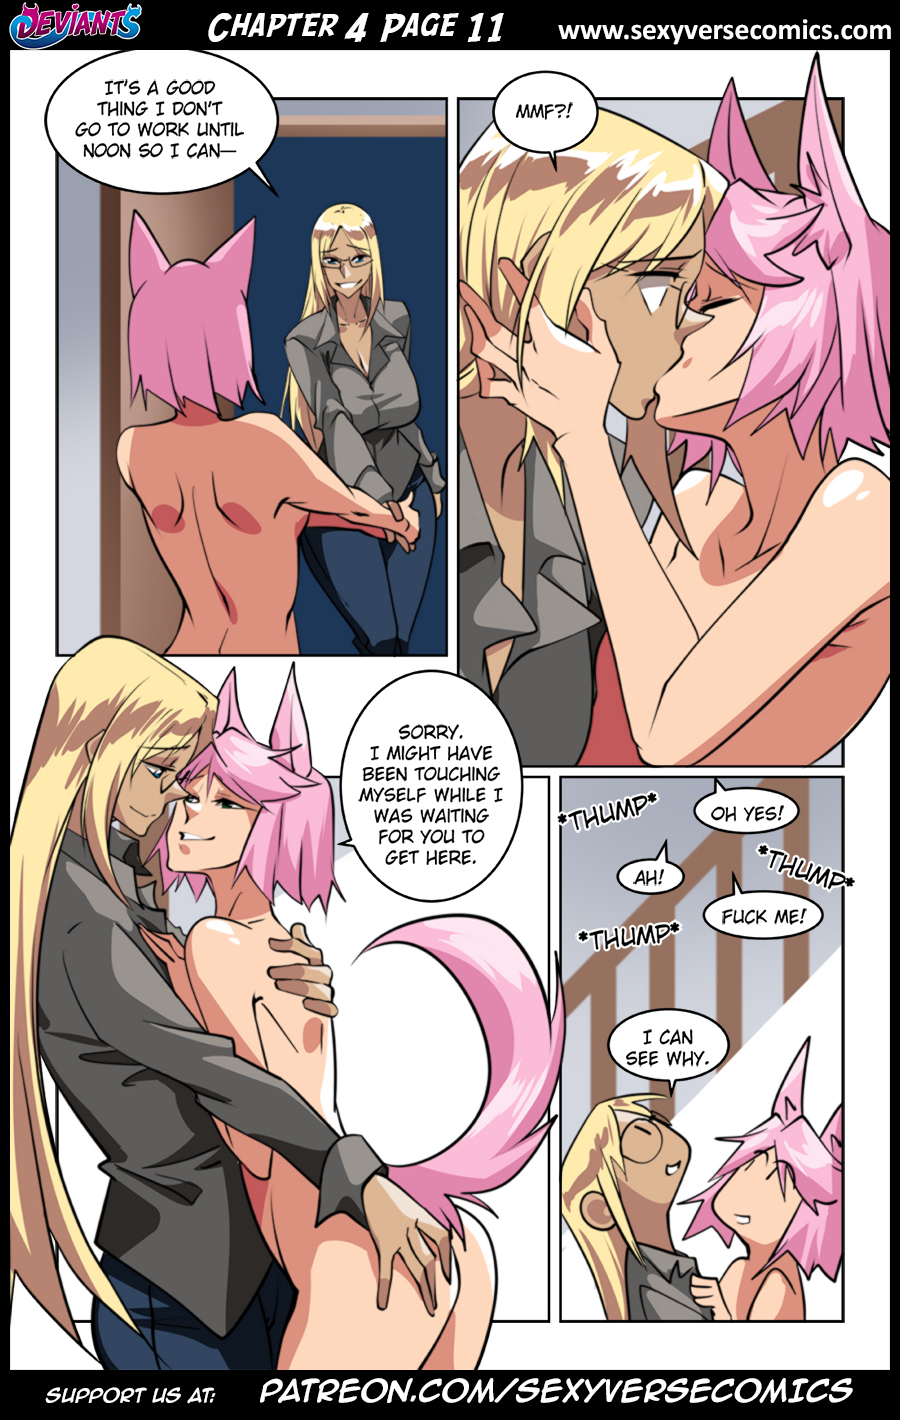 Deviants Chapter 4 Page 11